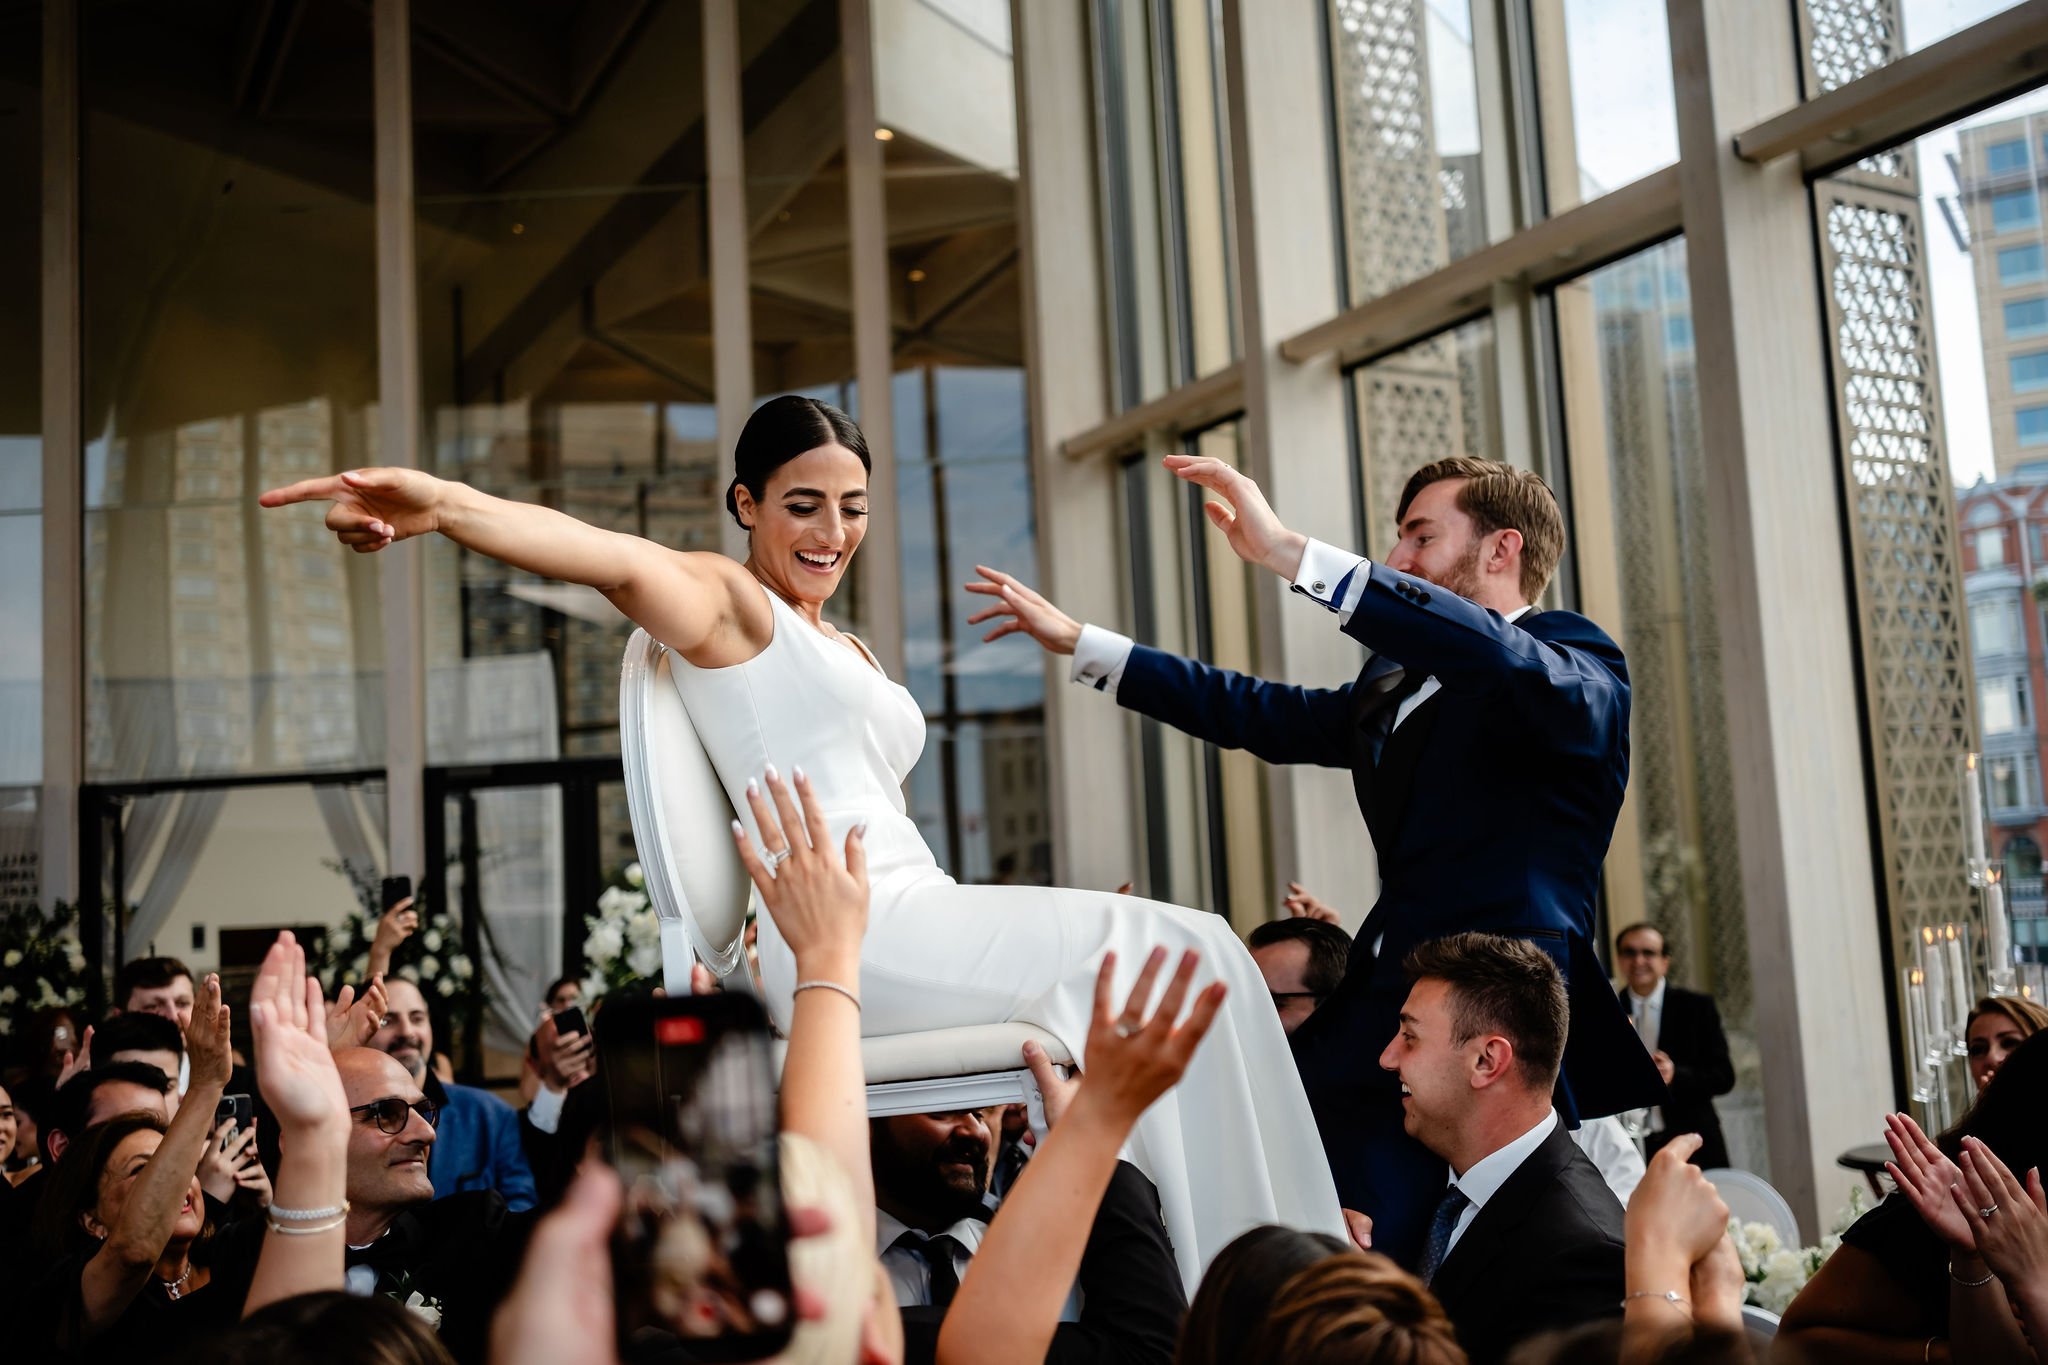 Photo of a bride and groom being raised up on chairs at an National Arts Centre (NAC) wedding reception